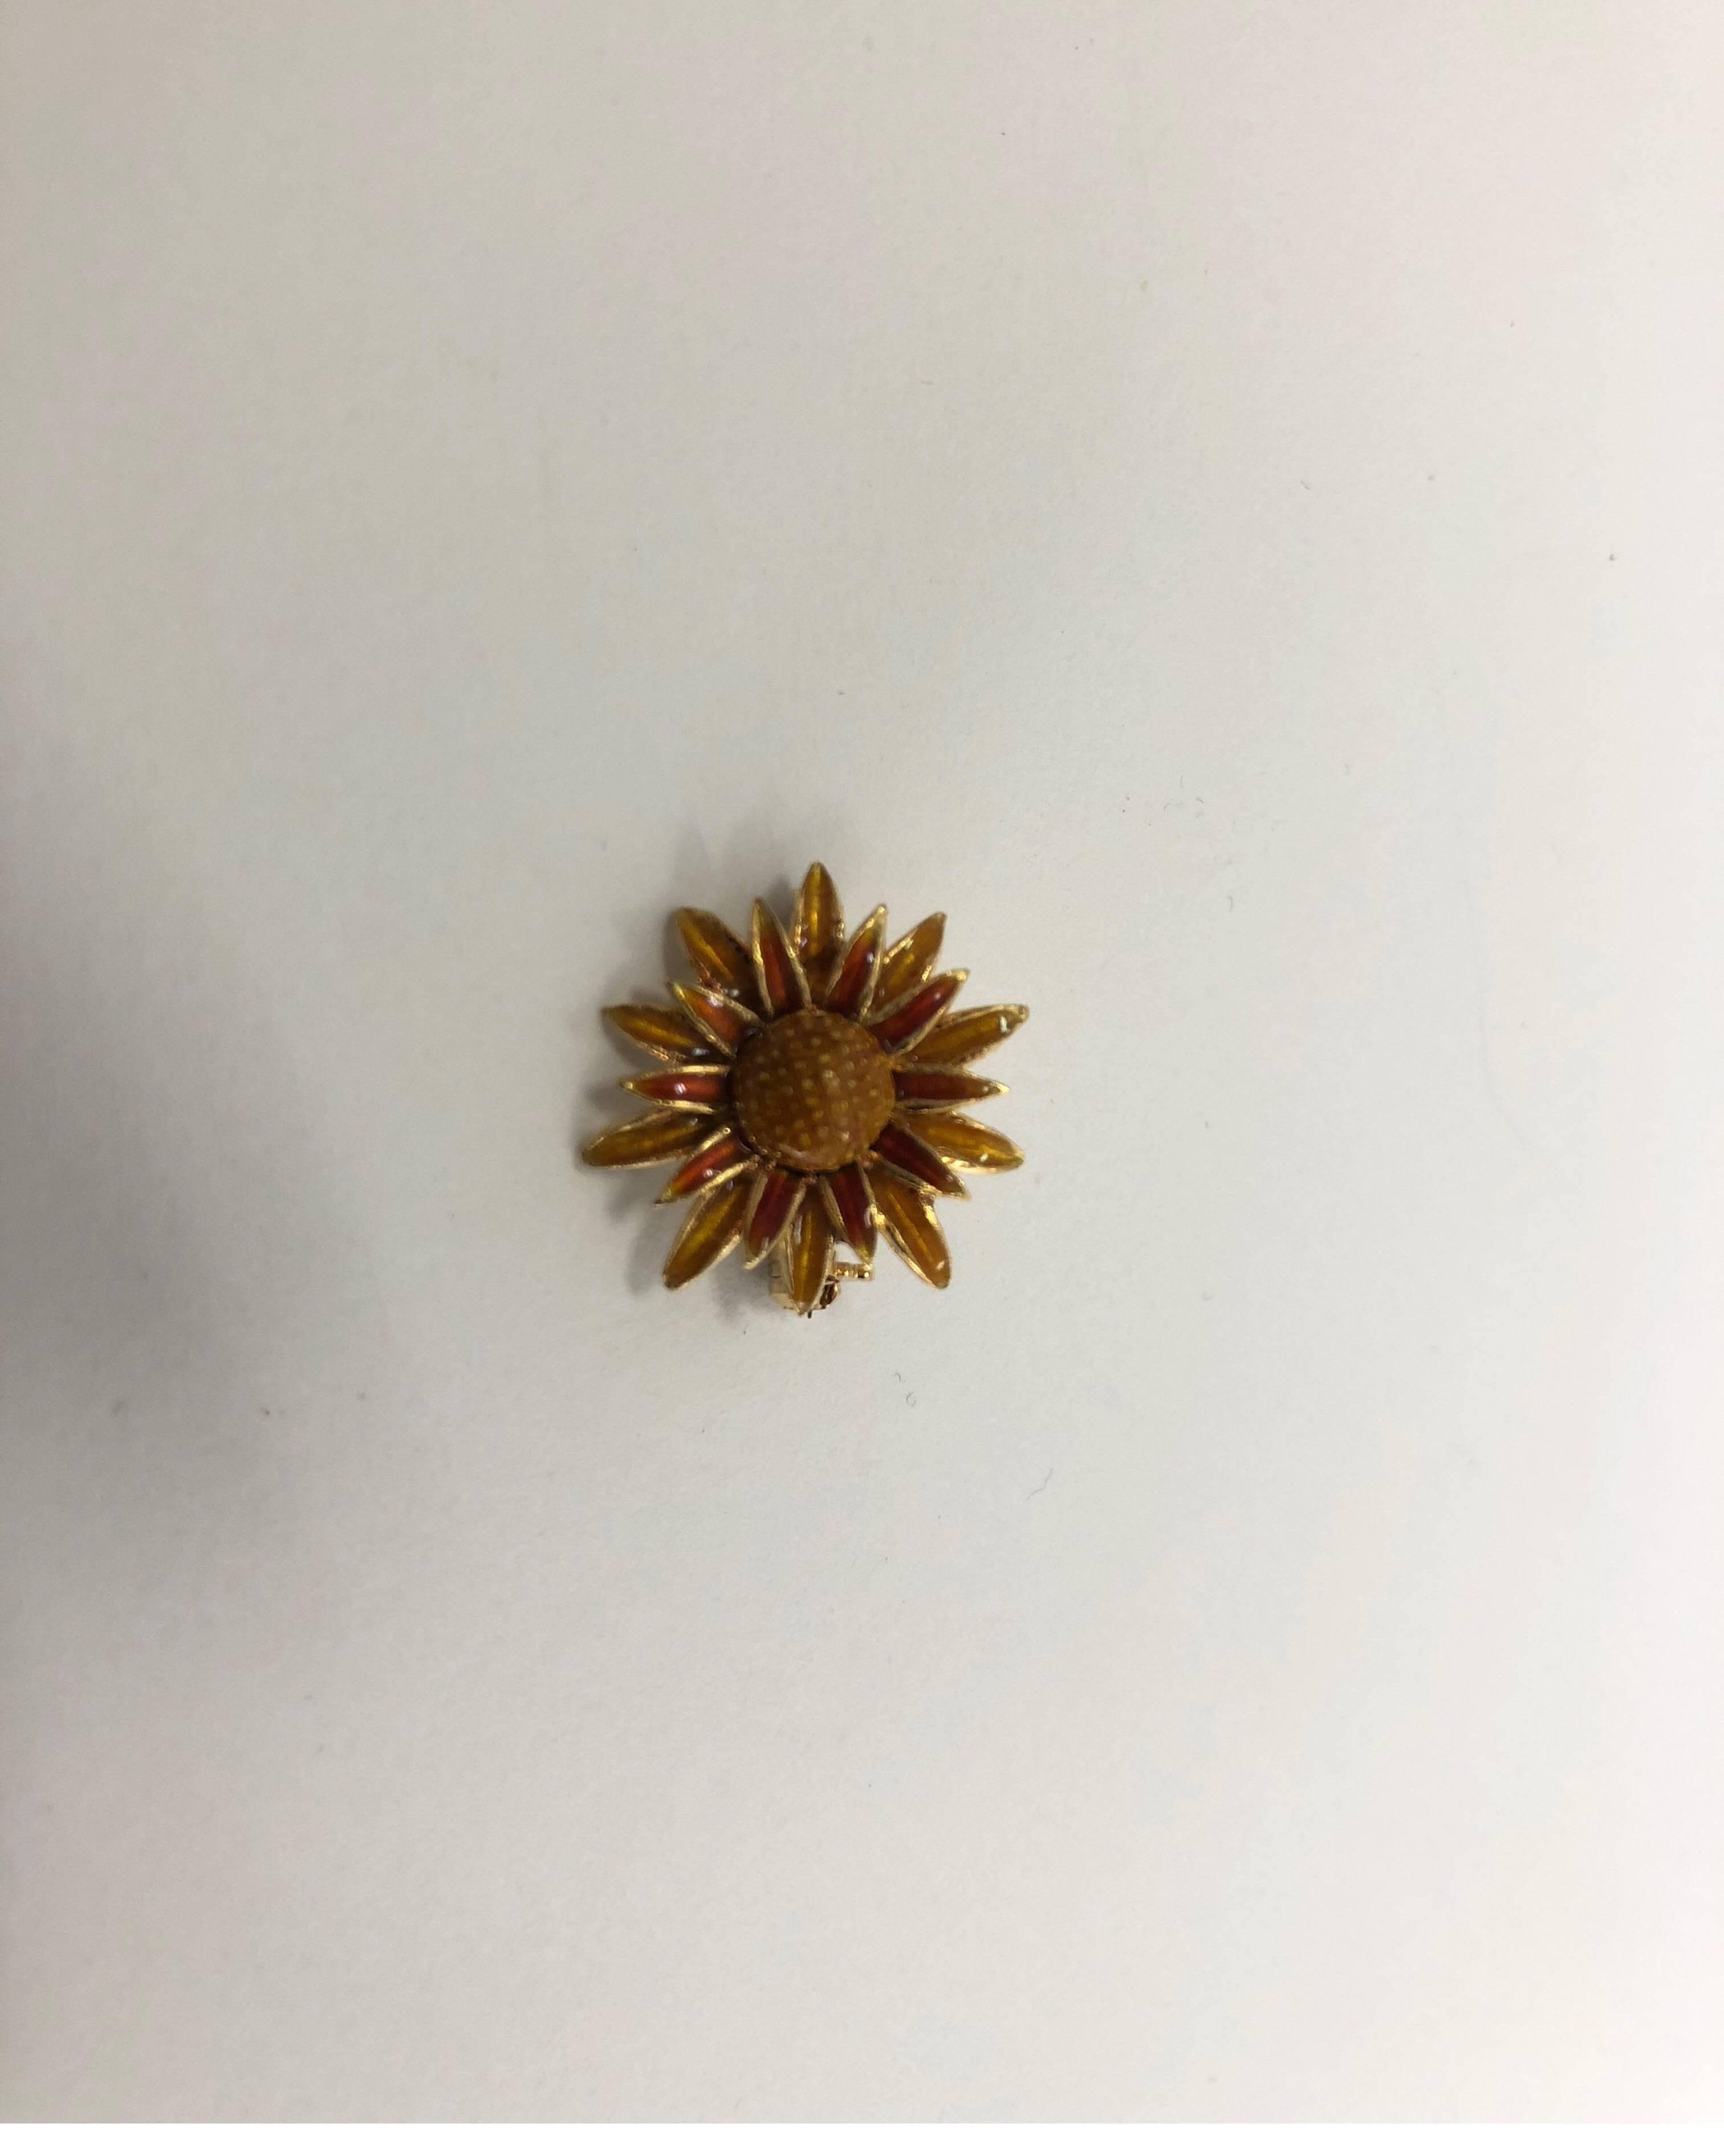 Sunflower pin in 18kt yellow gold, nicely enameled
total weight of gold 3 gr
